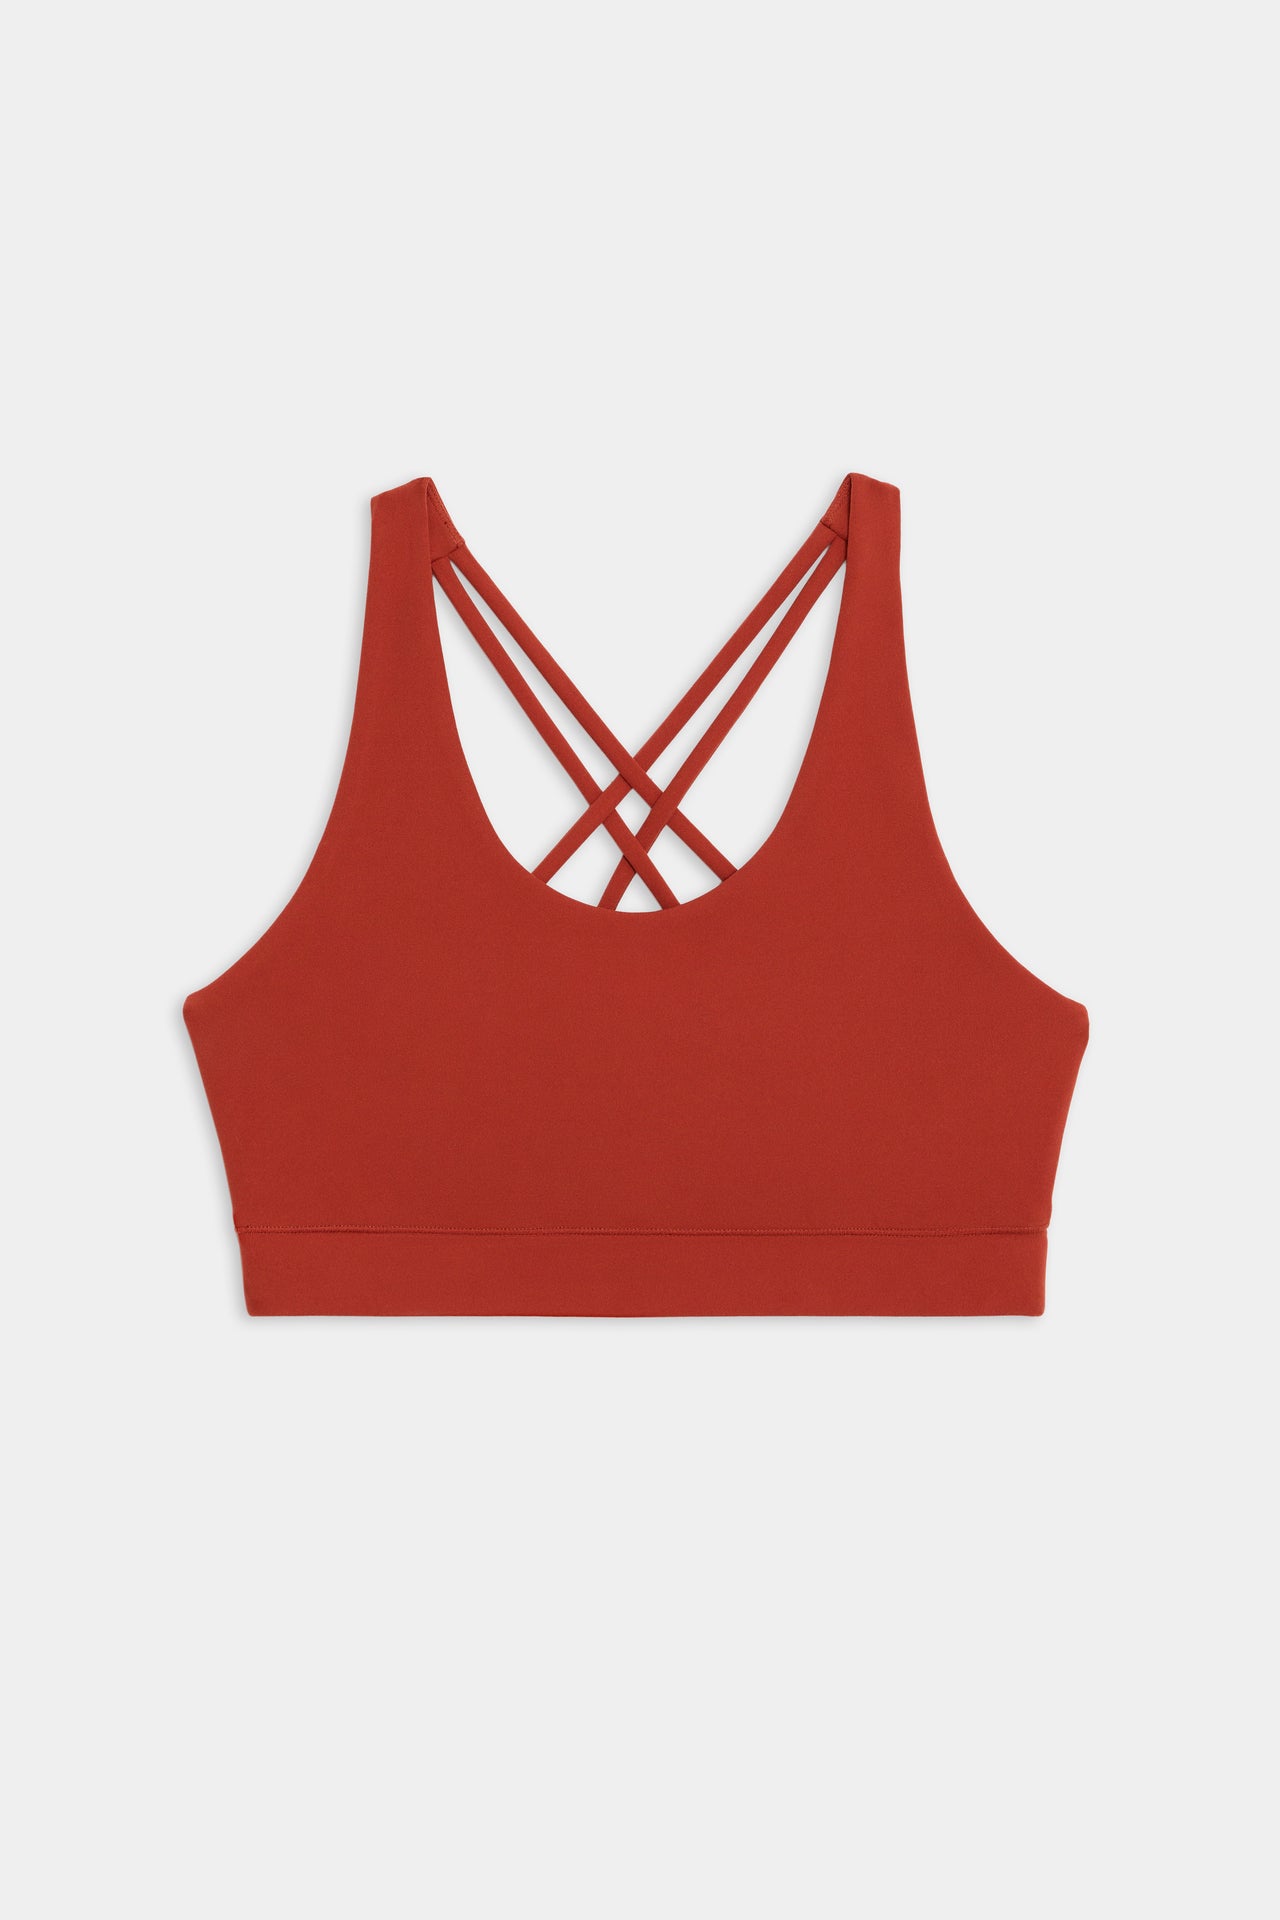 Flat view of red sports bra with thick straps and 4 criss crossed spaghetti straps